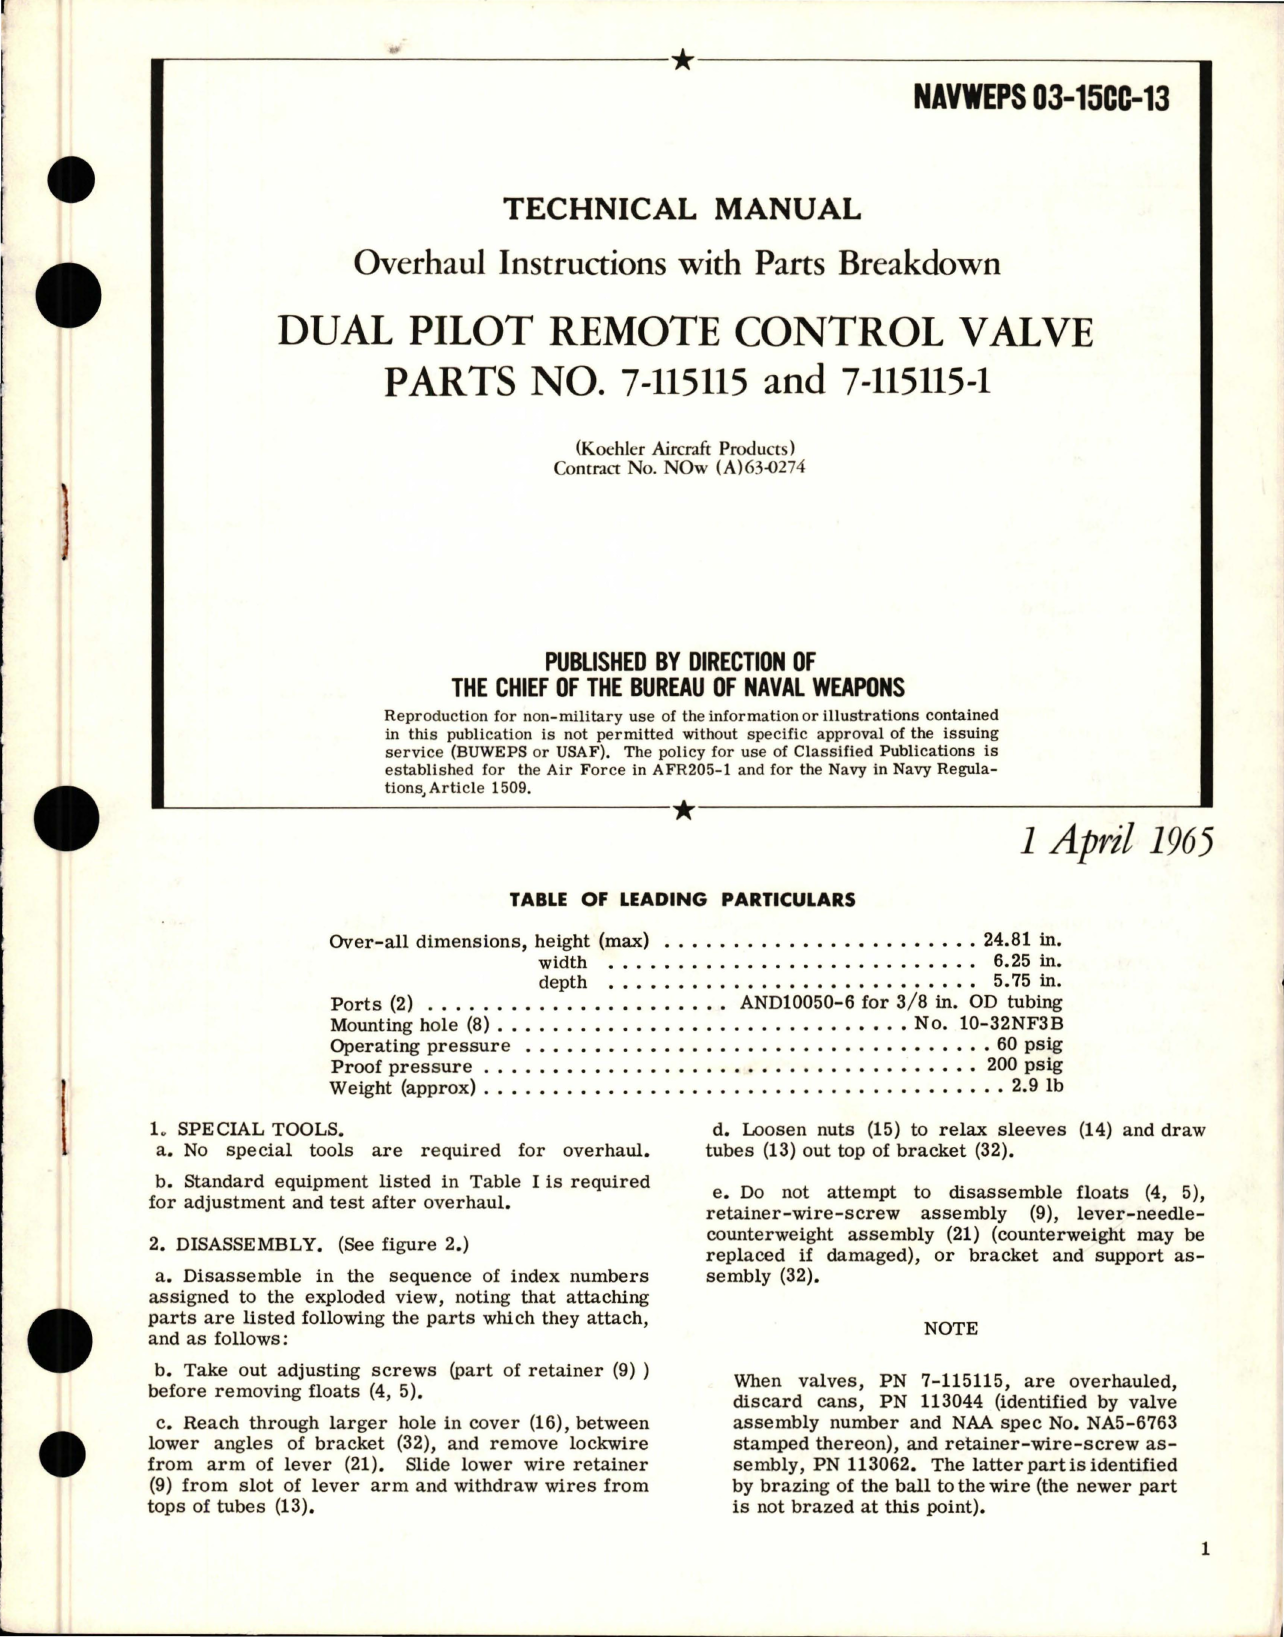 Sample page 1 from AirCorps Library document: Overhaul Instructions with Parts for Dual Pilot Remote Control Valve - Parts 7-115115 and 7-115115-1